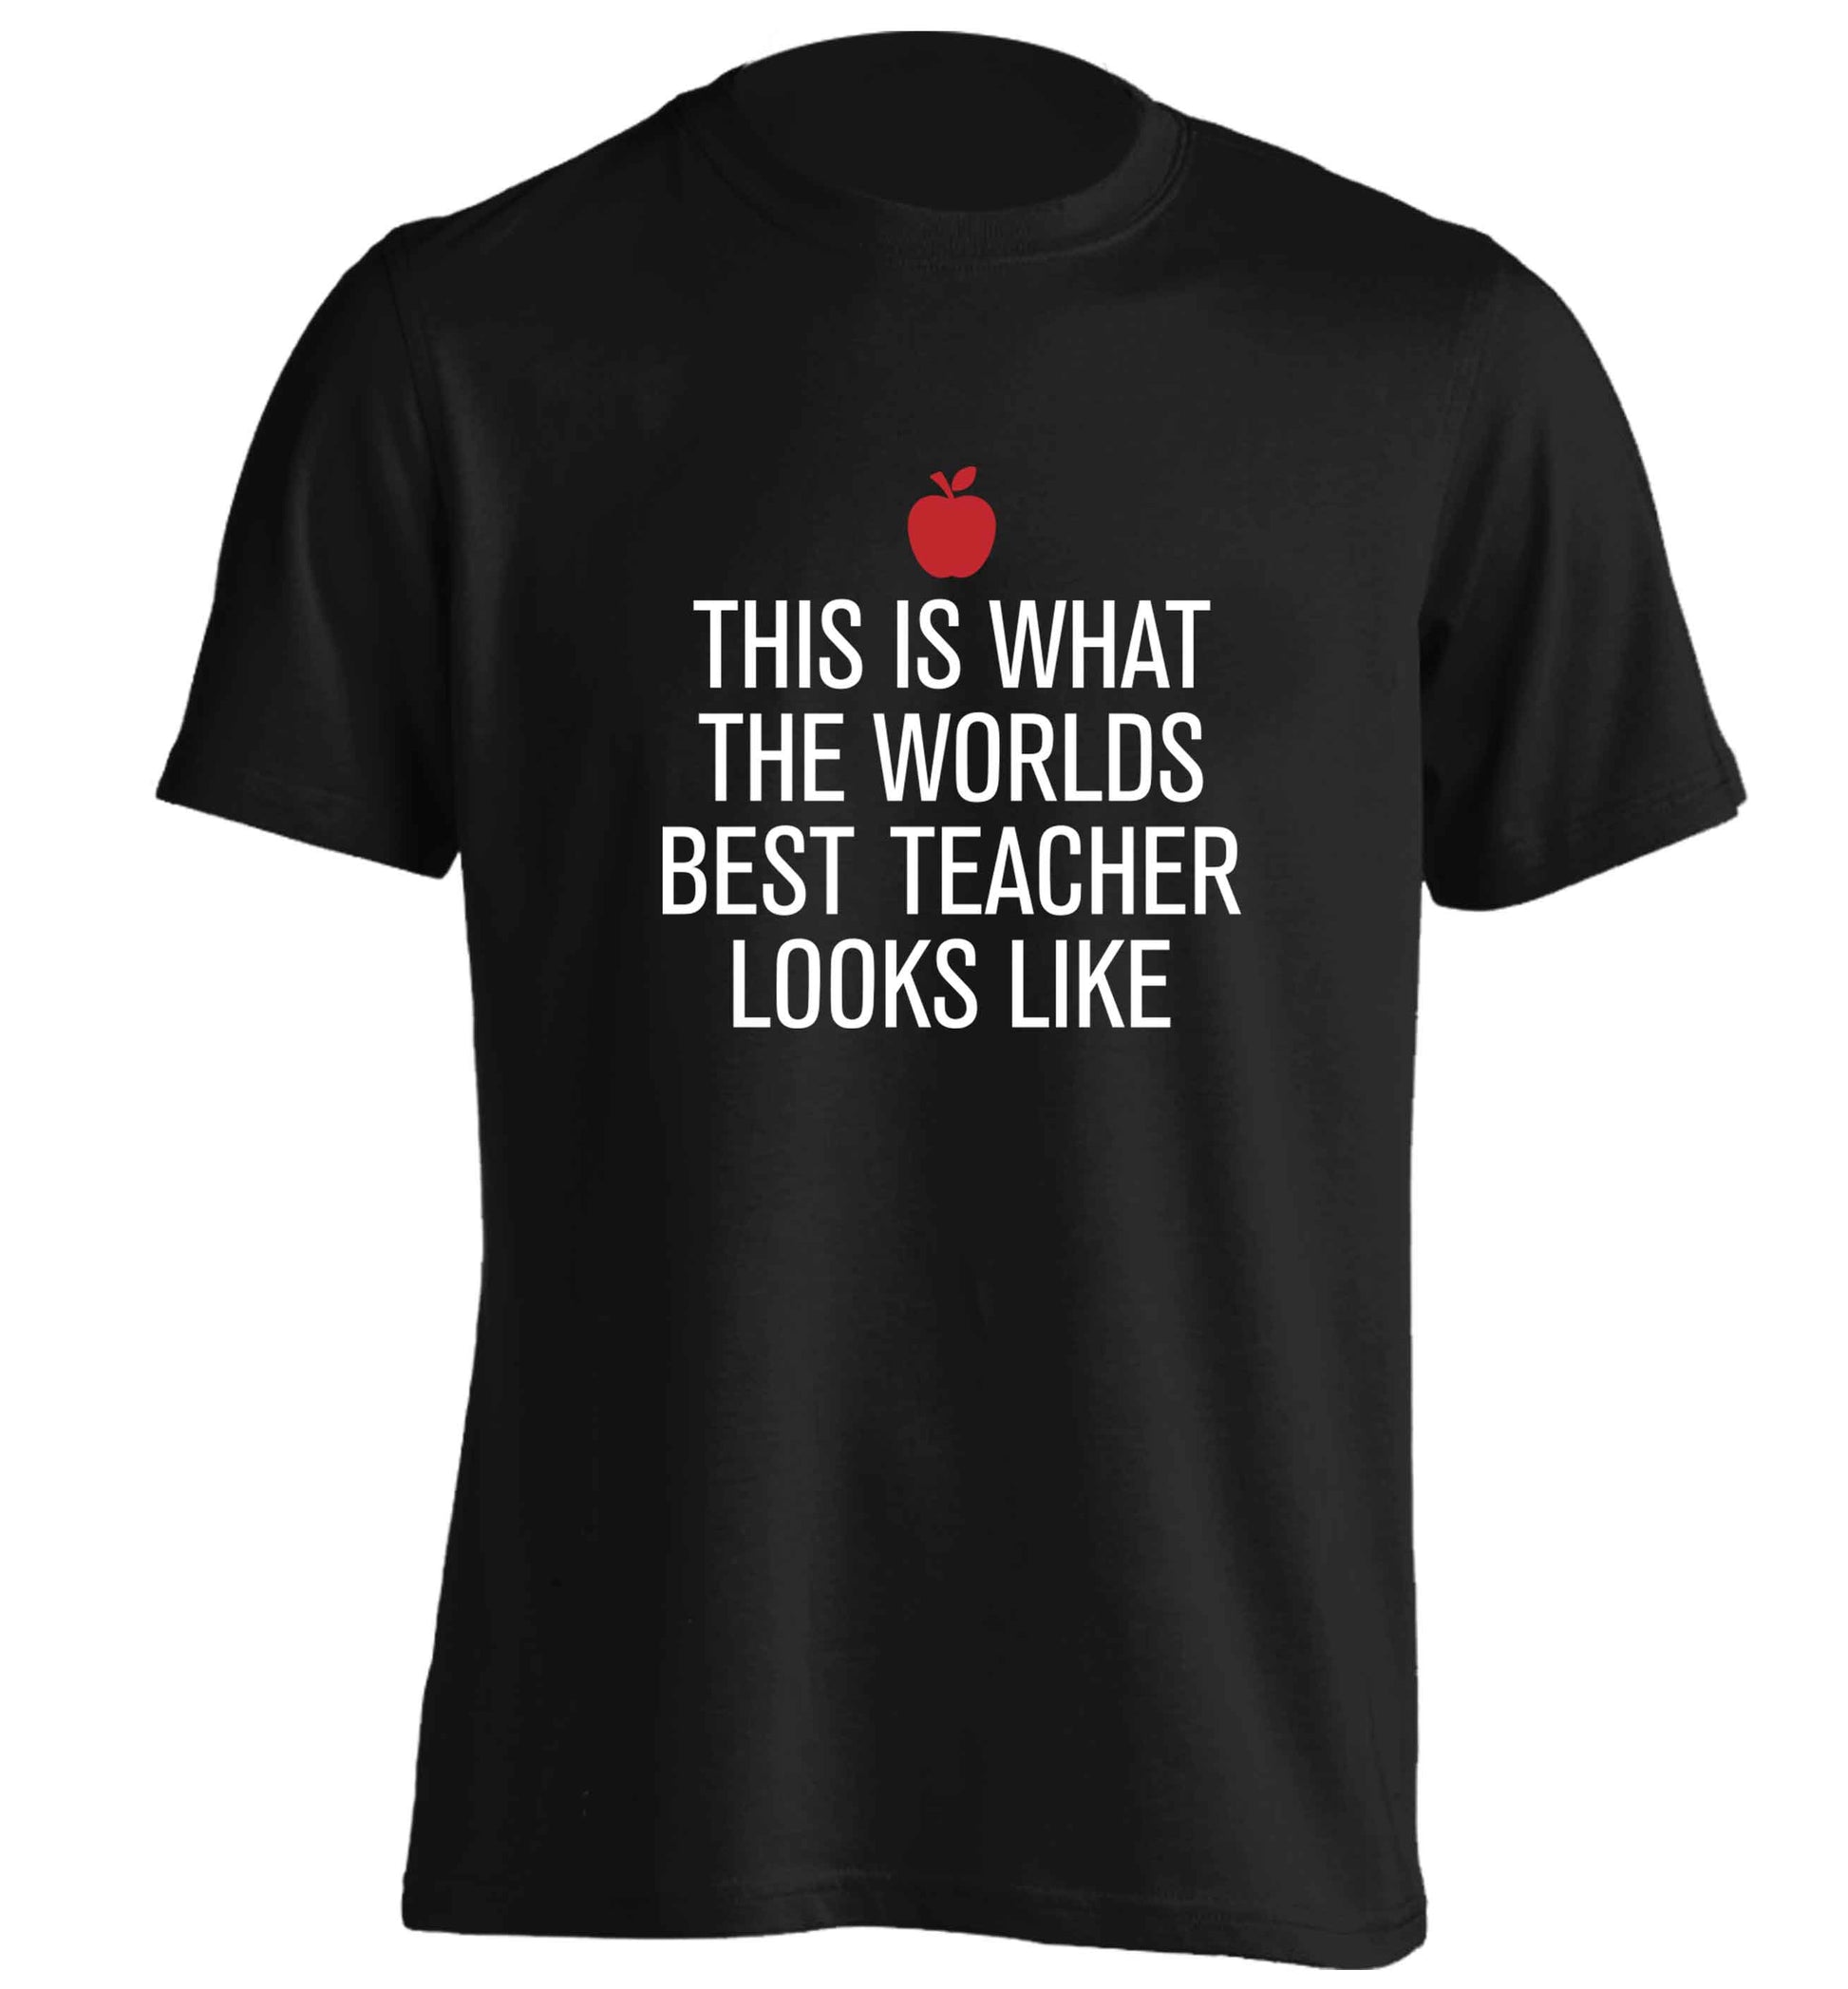 This is what the worlds best teacher looks like adults unisex black Tshirt 2XL